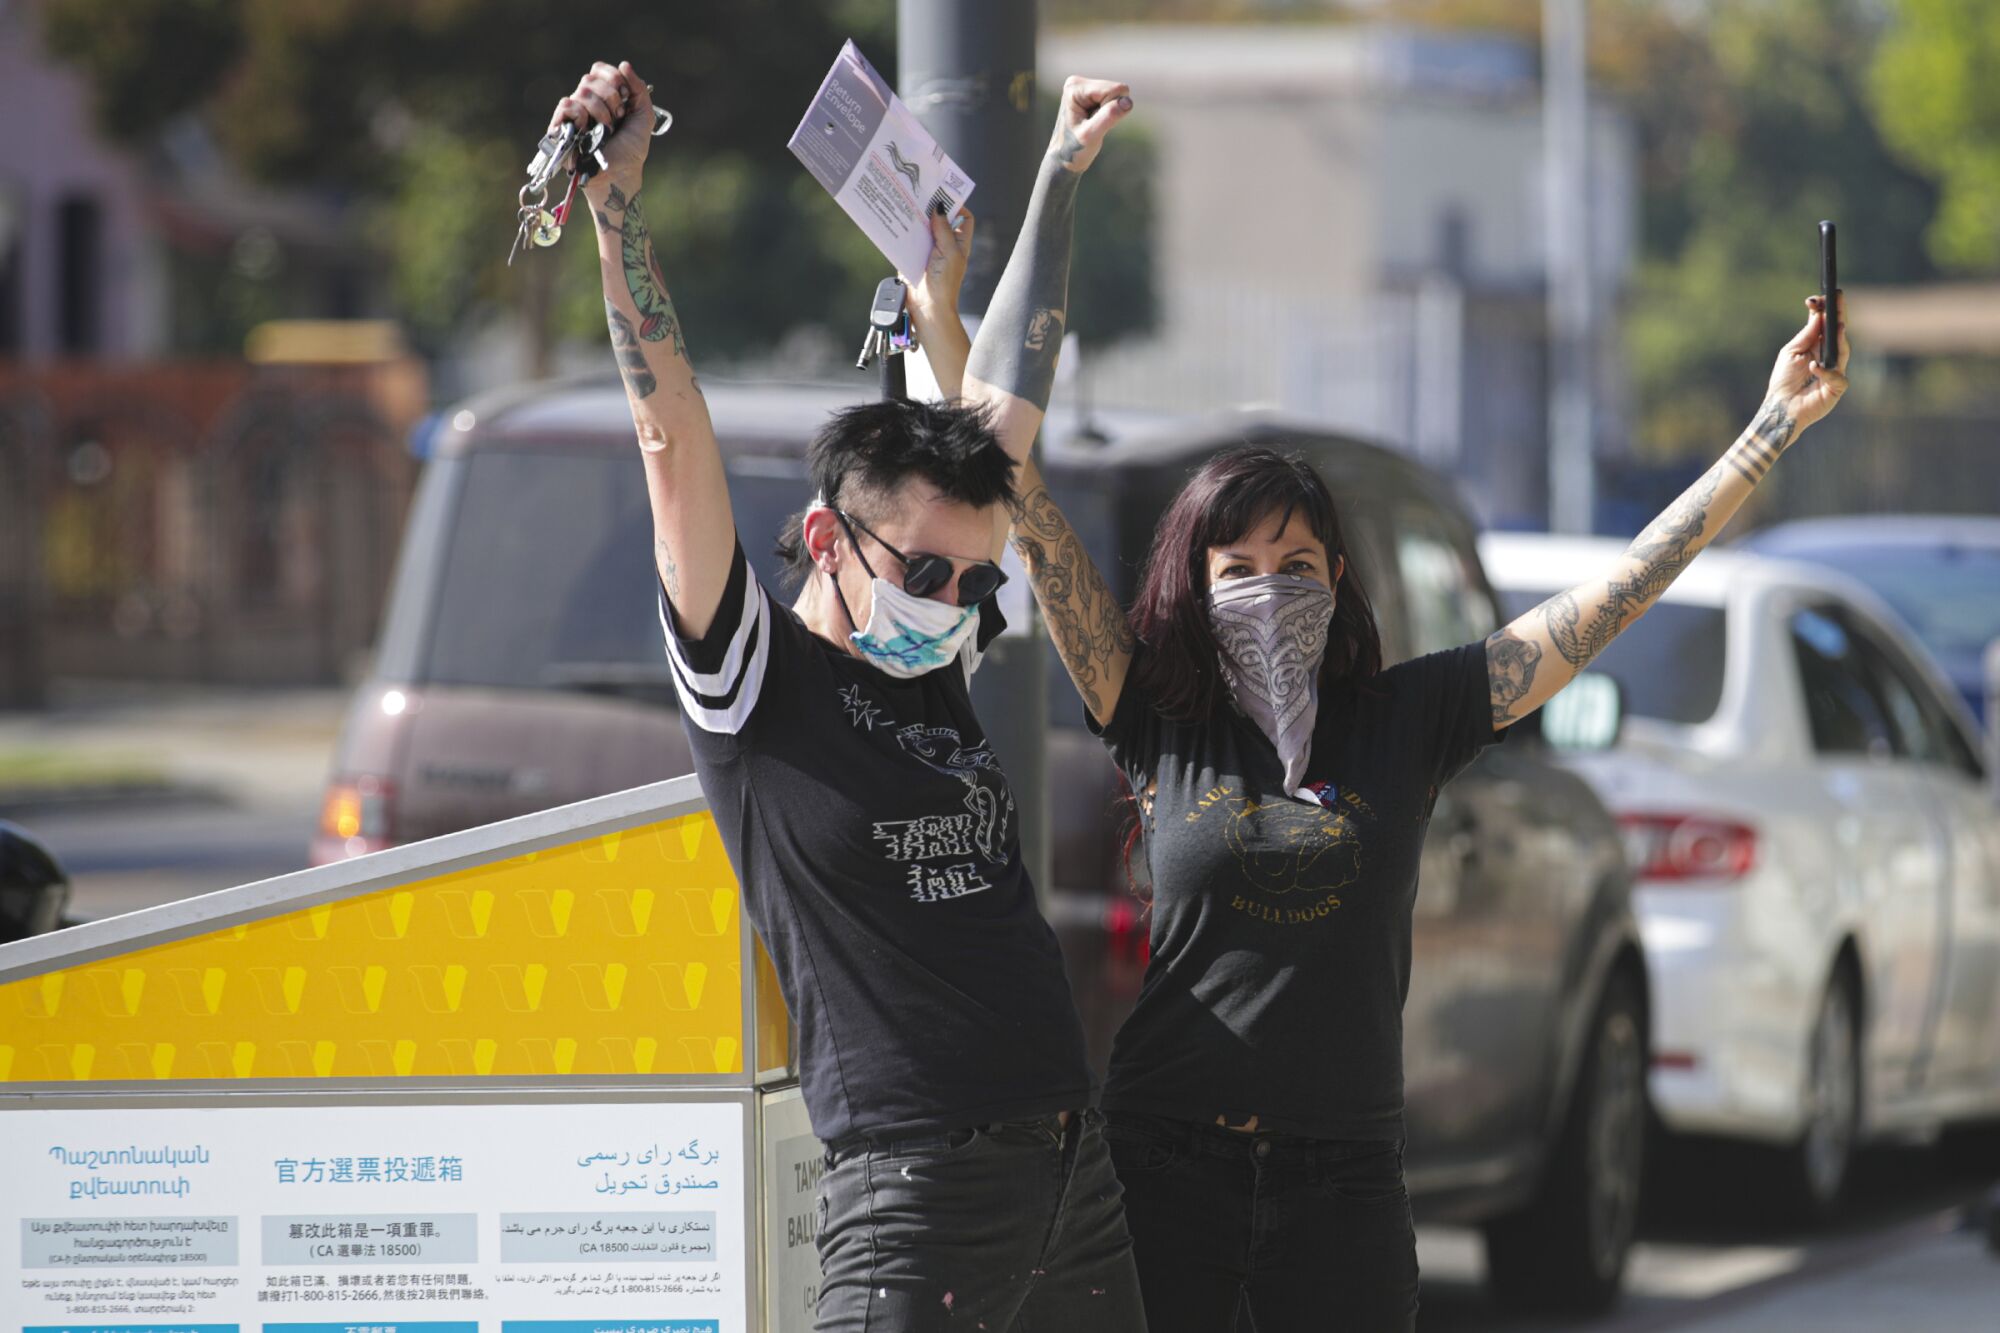 Two young people lift tattooed arms to the sky in front of a ballot box.